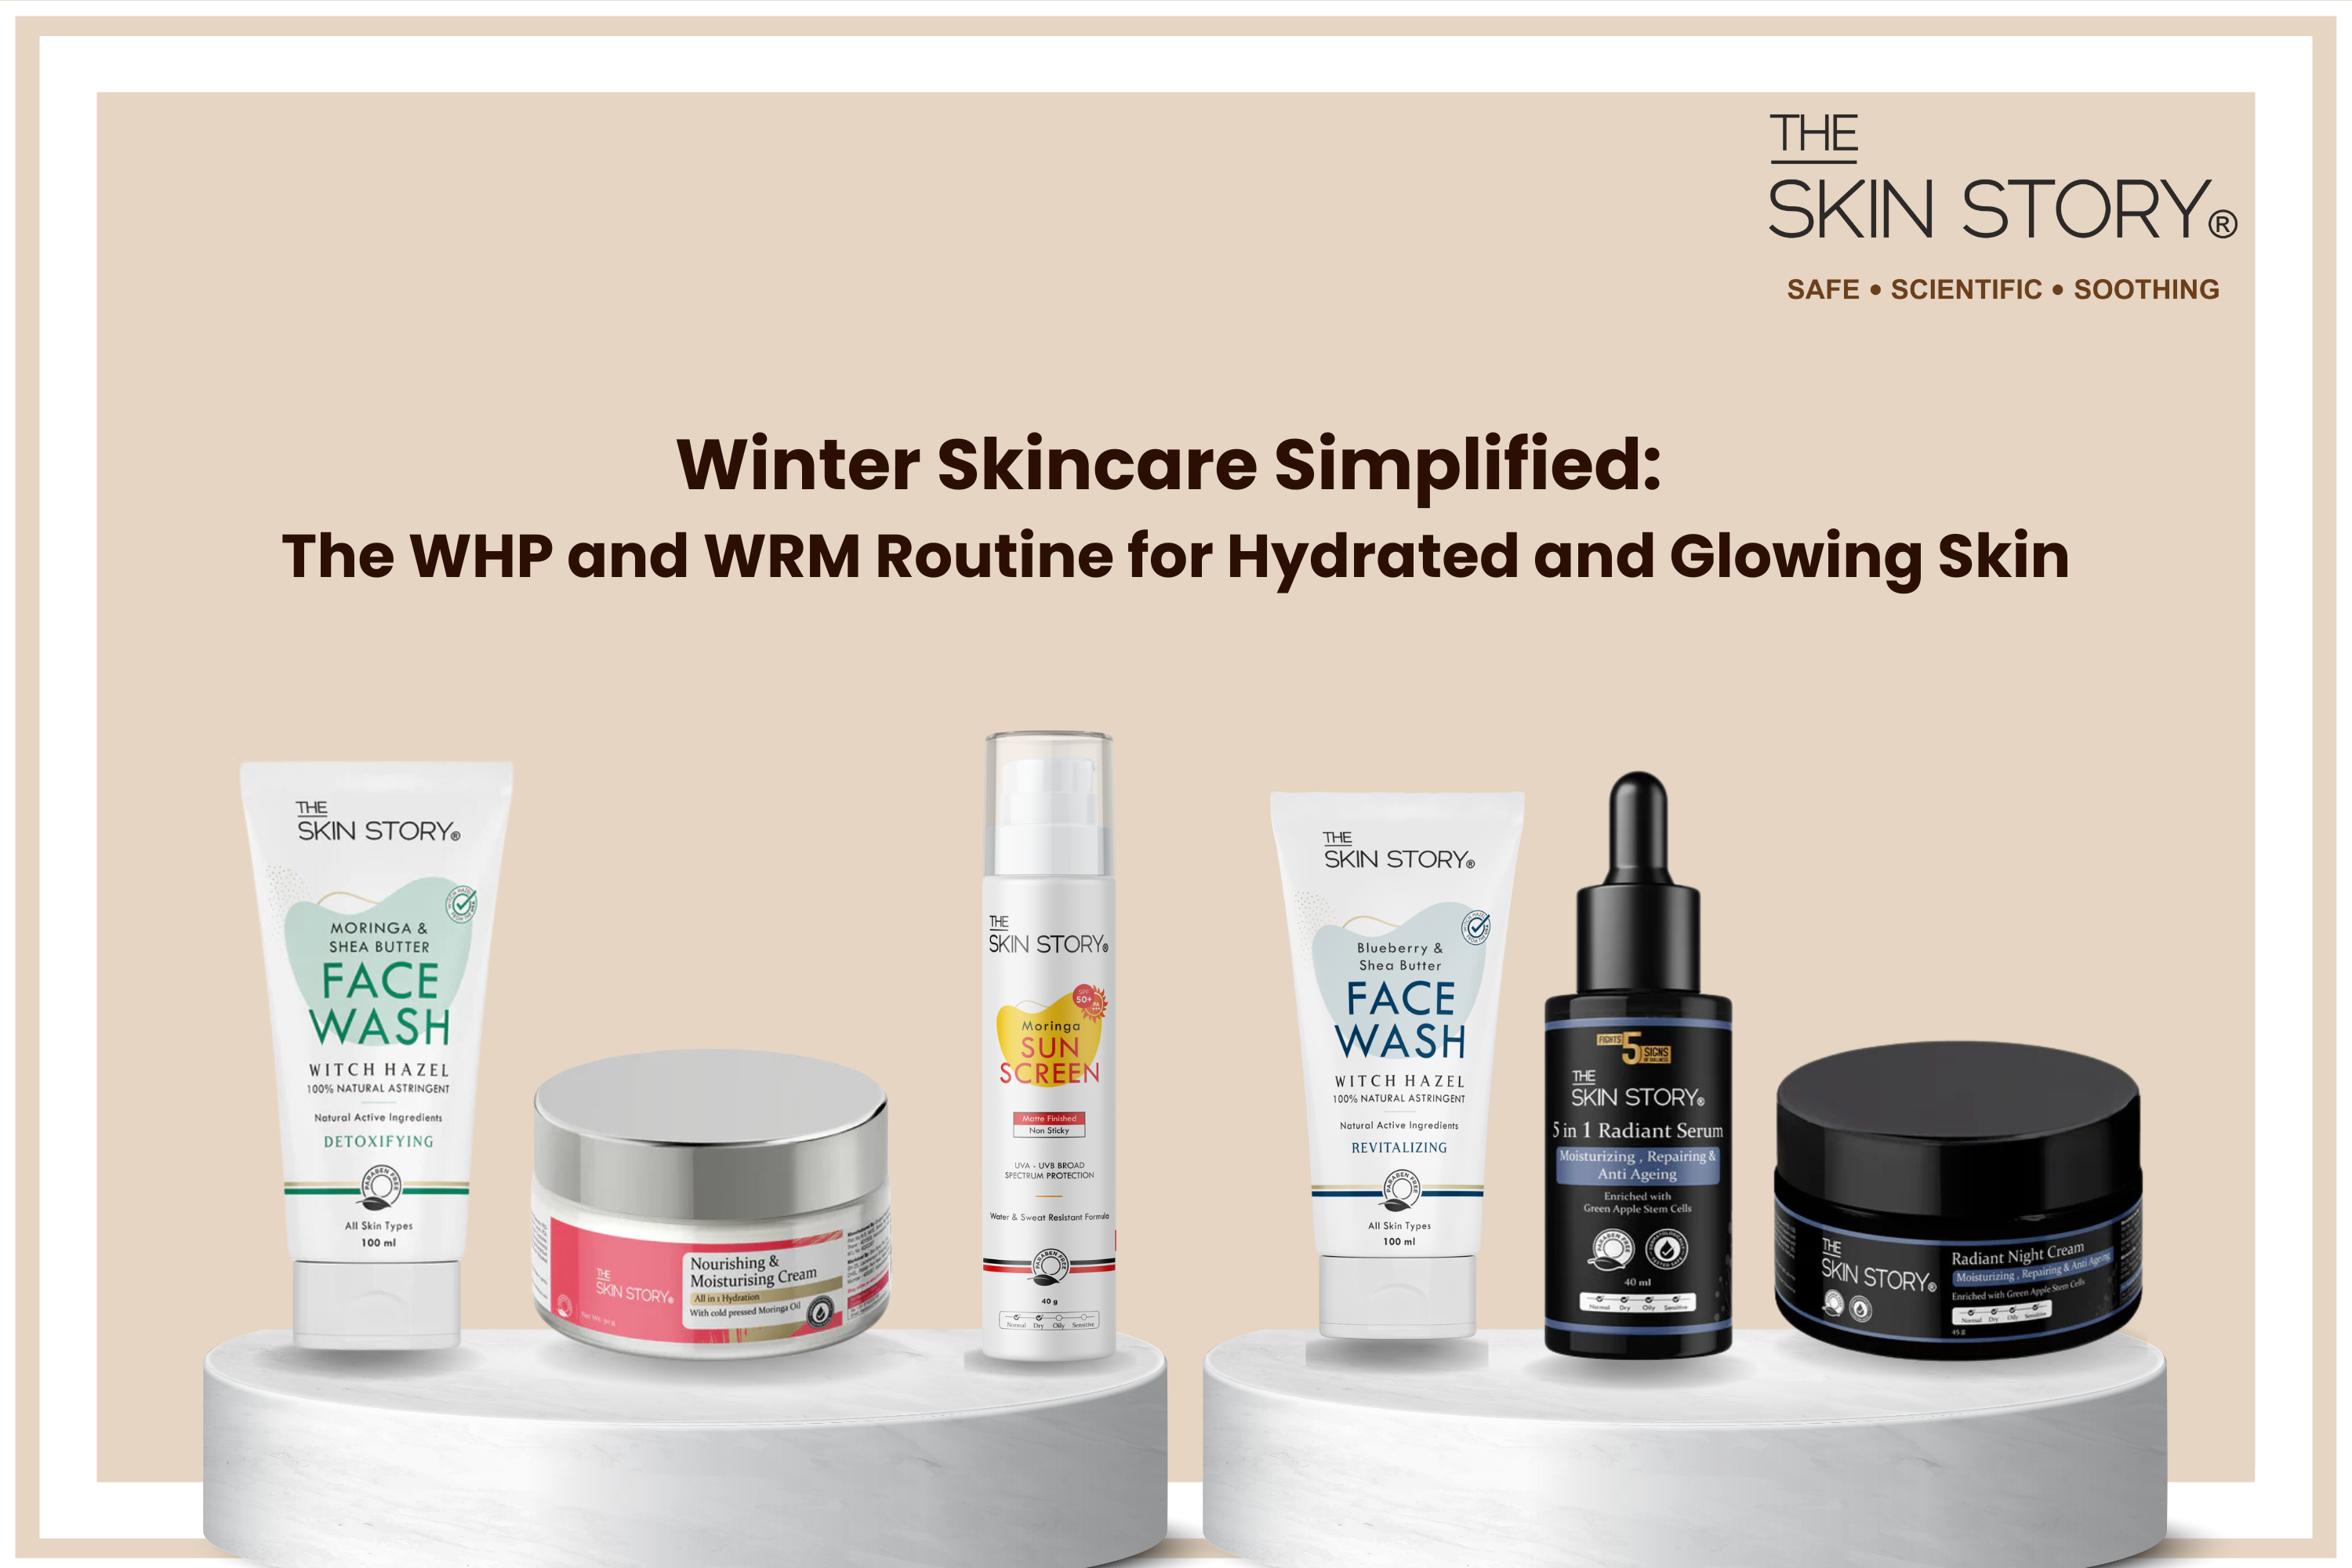 Winter Skincare Simplified: The WHP and WRM Routine for Hydrated and Glowing Skin